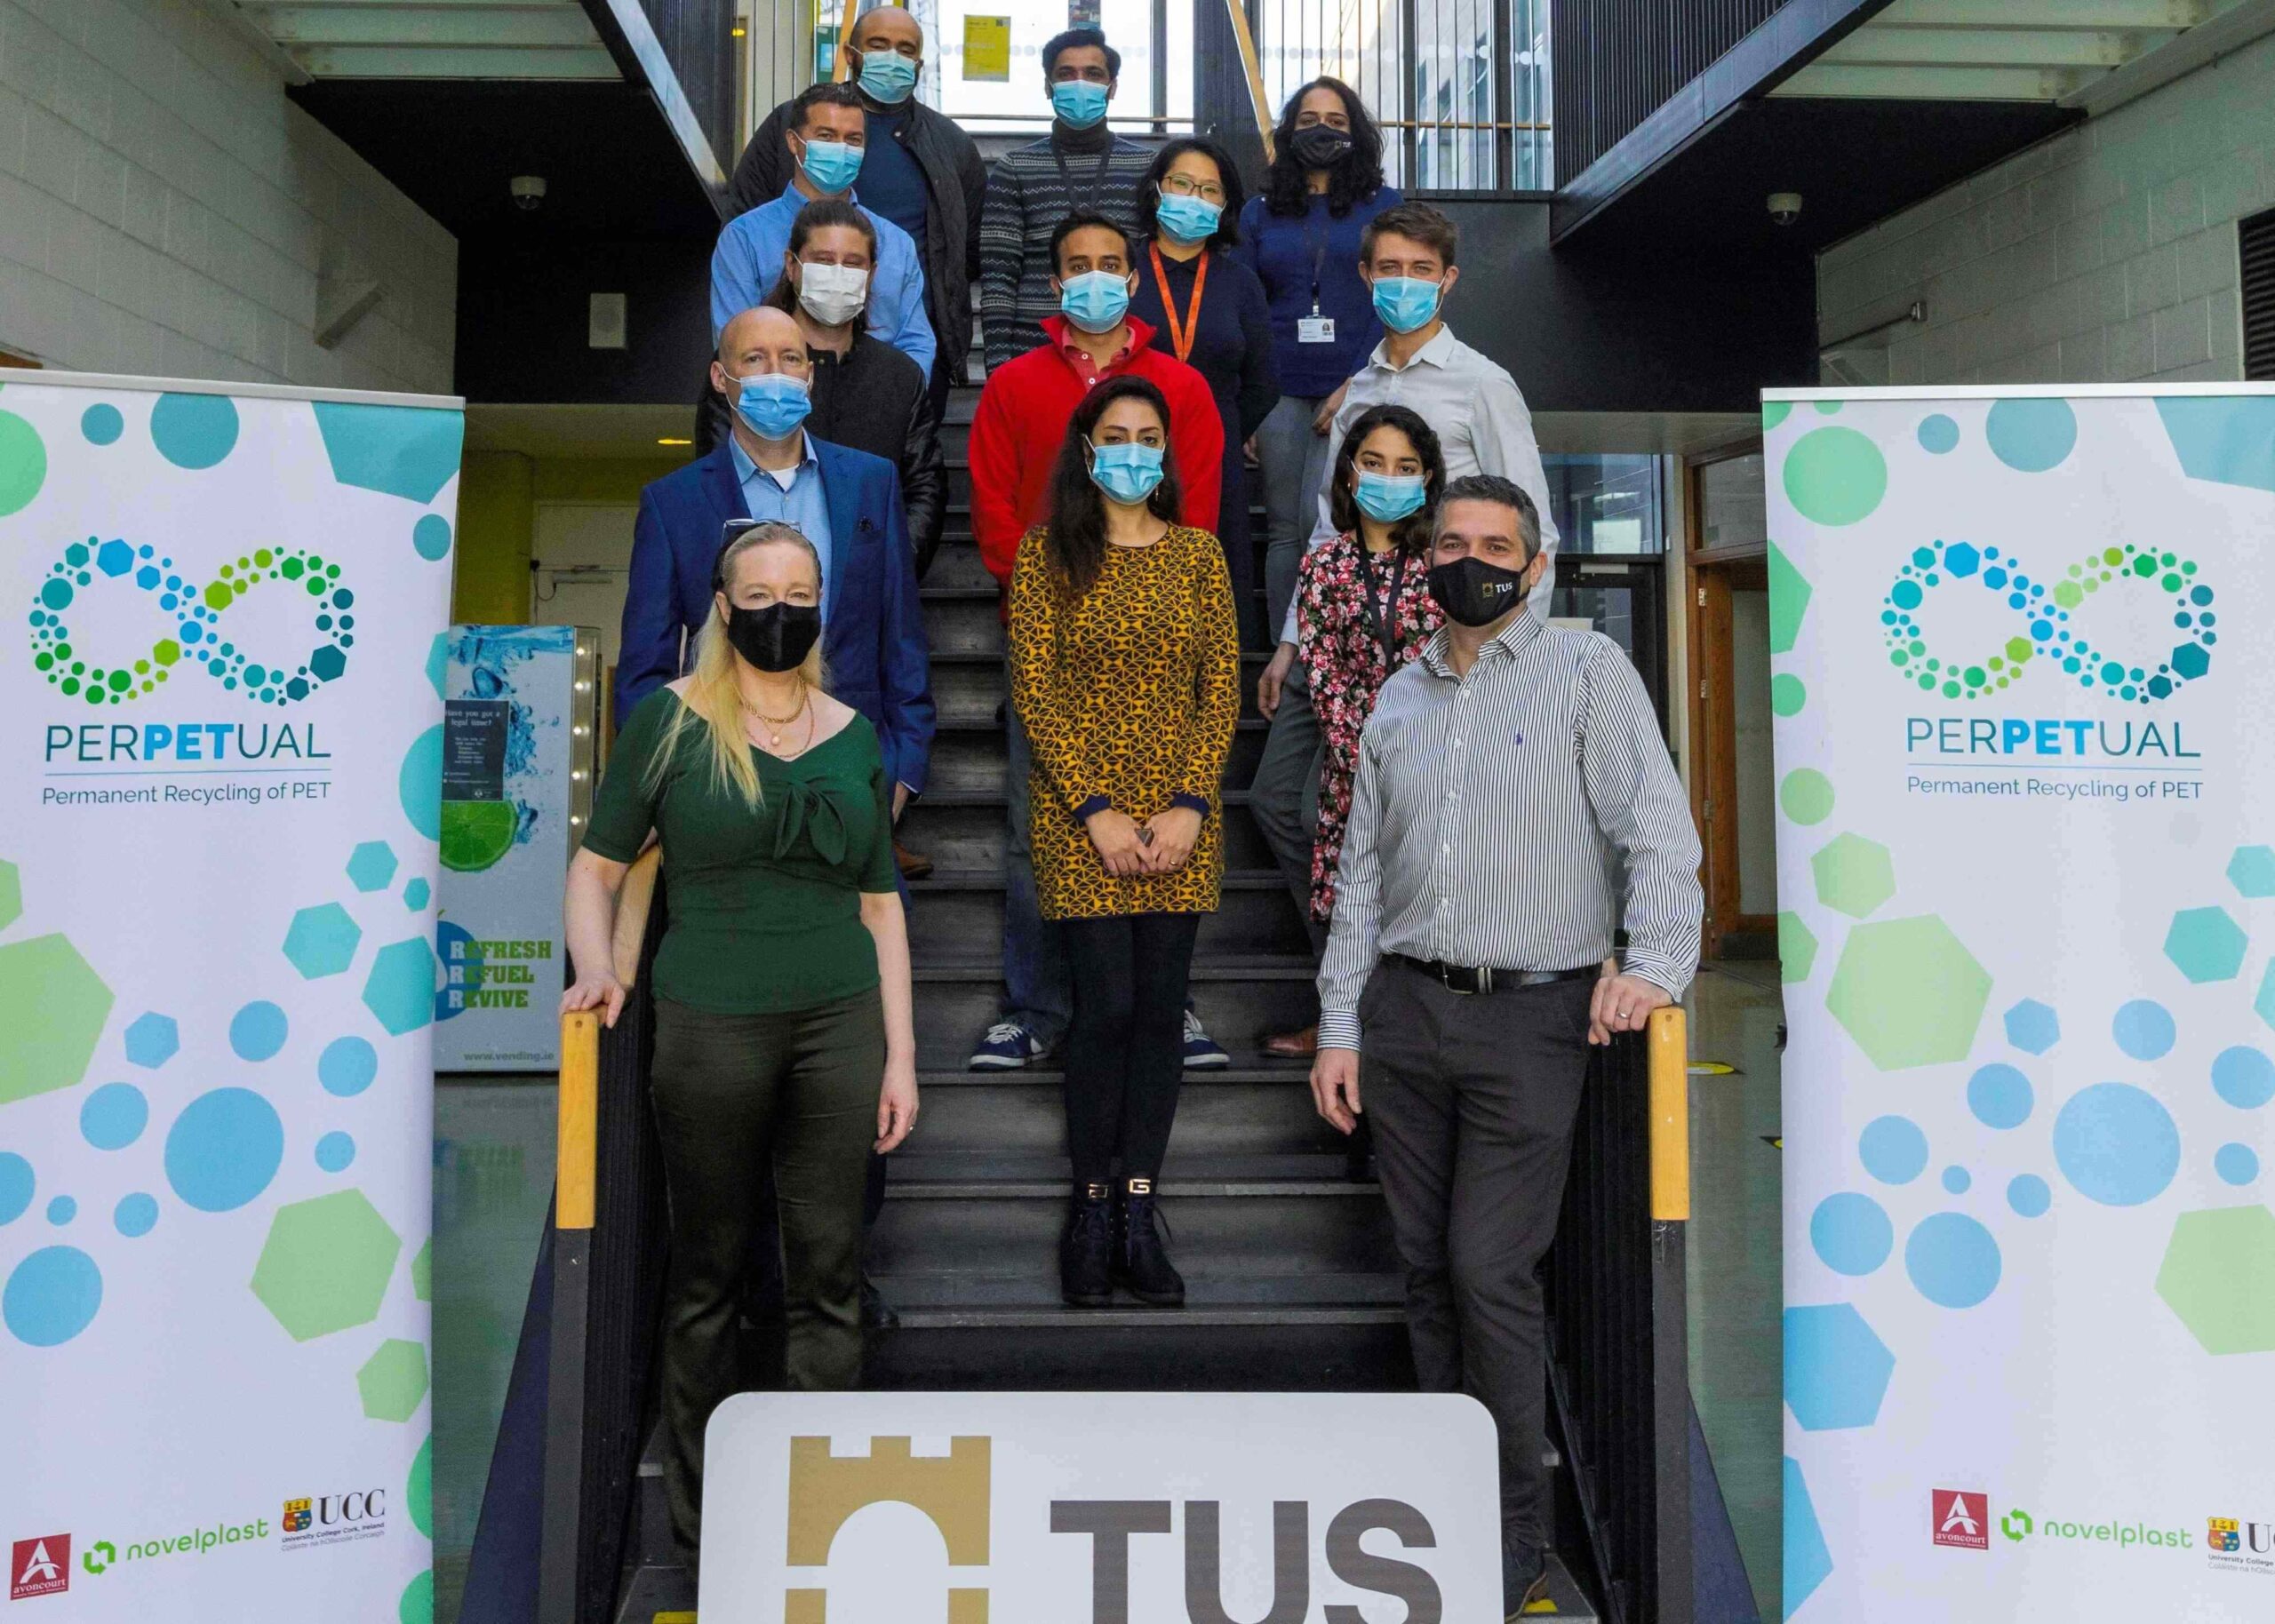 TUS PerPETual project - A €2.9 million project aimed at tackling plastic packaging pollution has been launched by Technological University of the Shannon: Midlands Midwest (TUS).